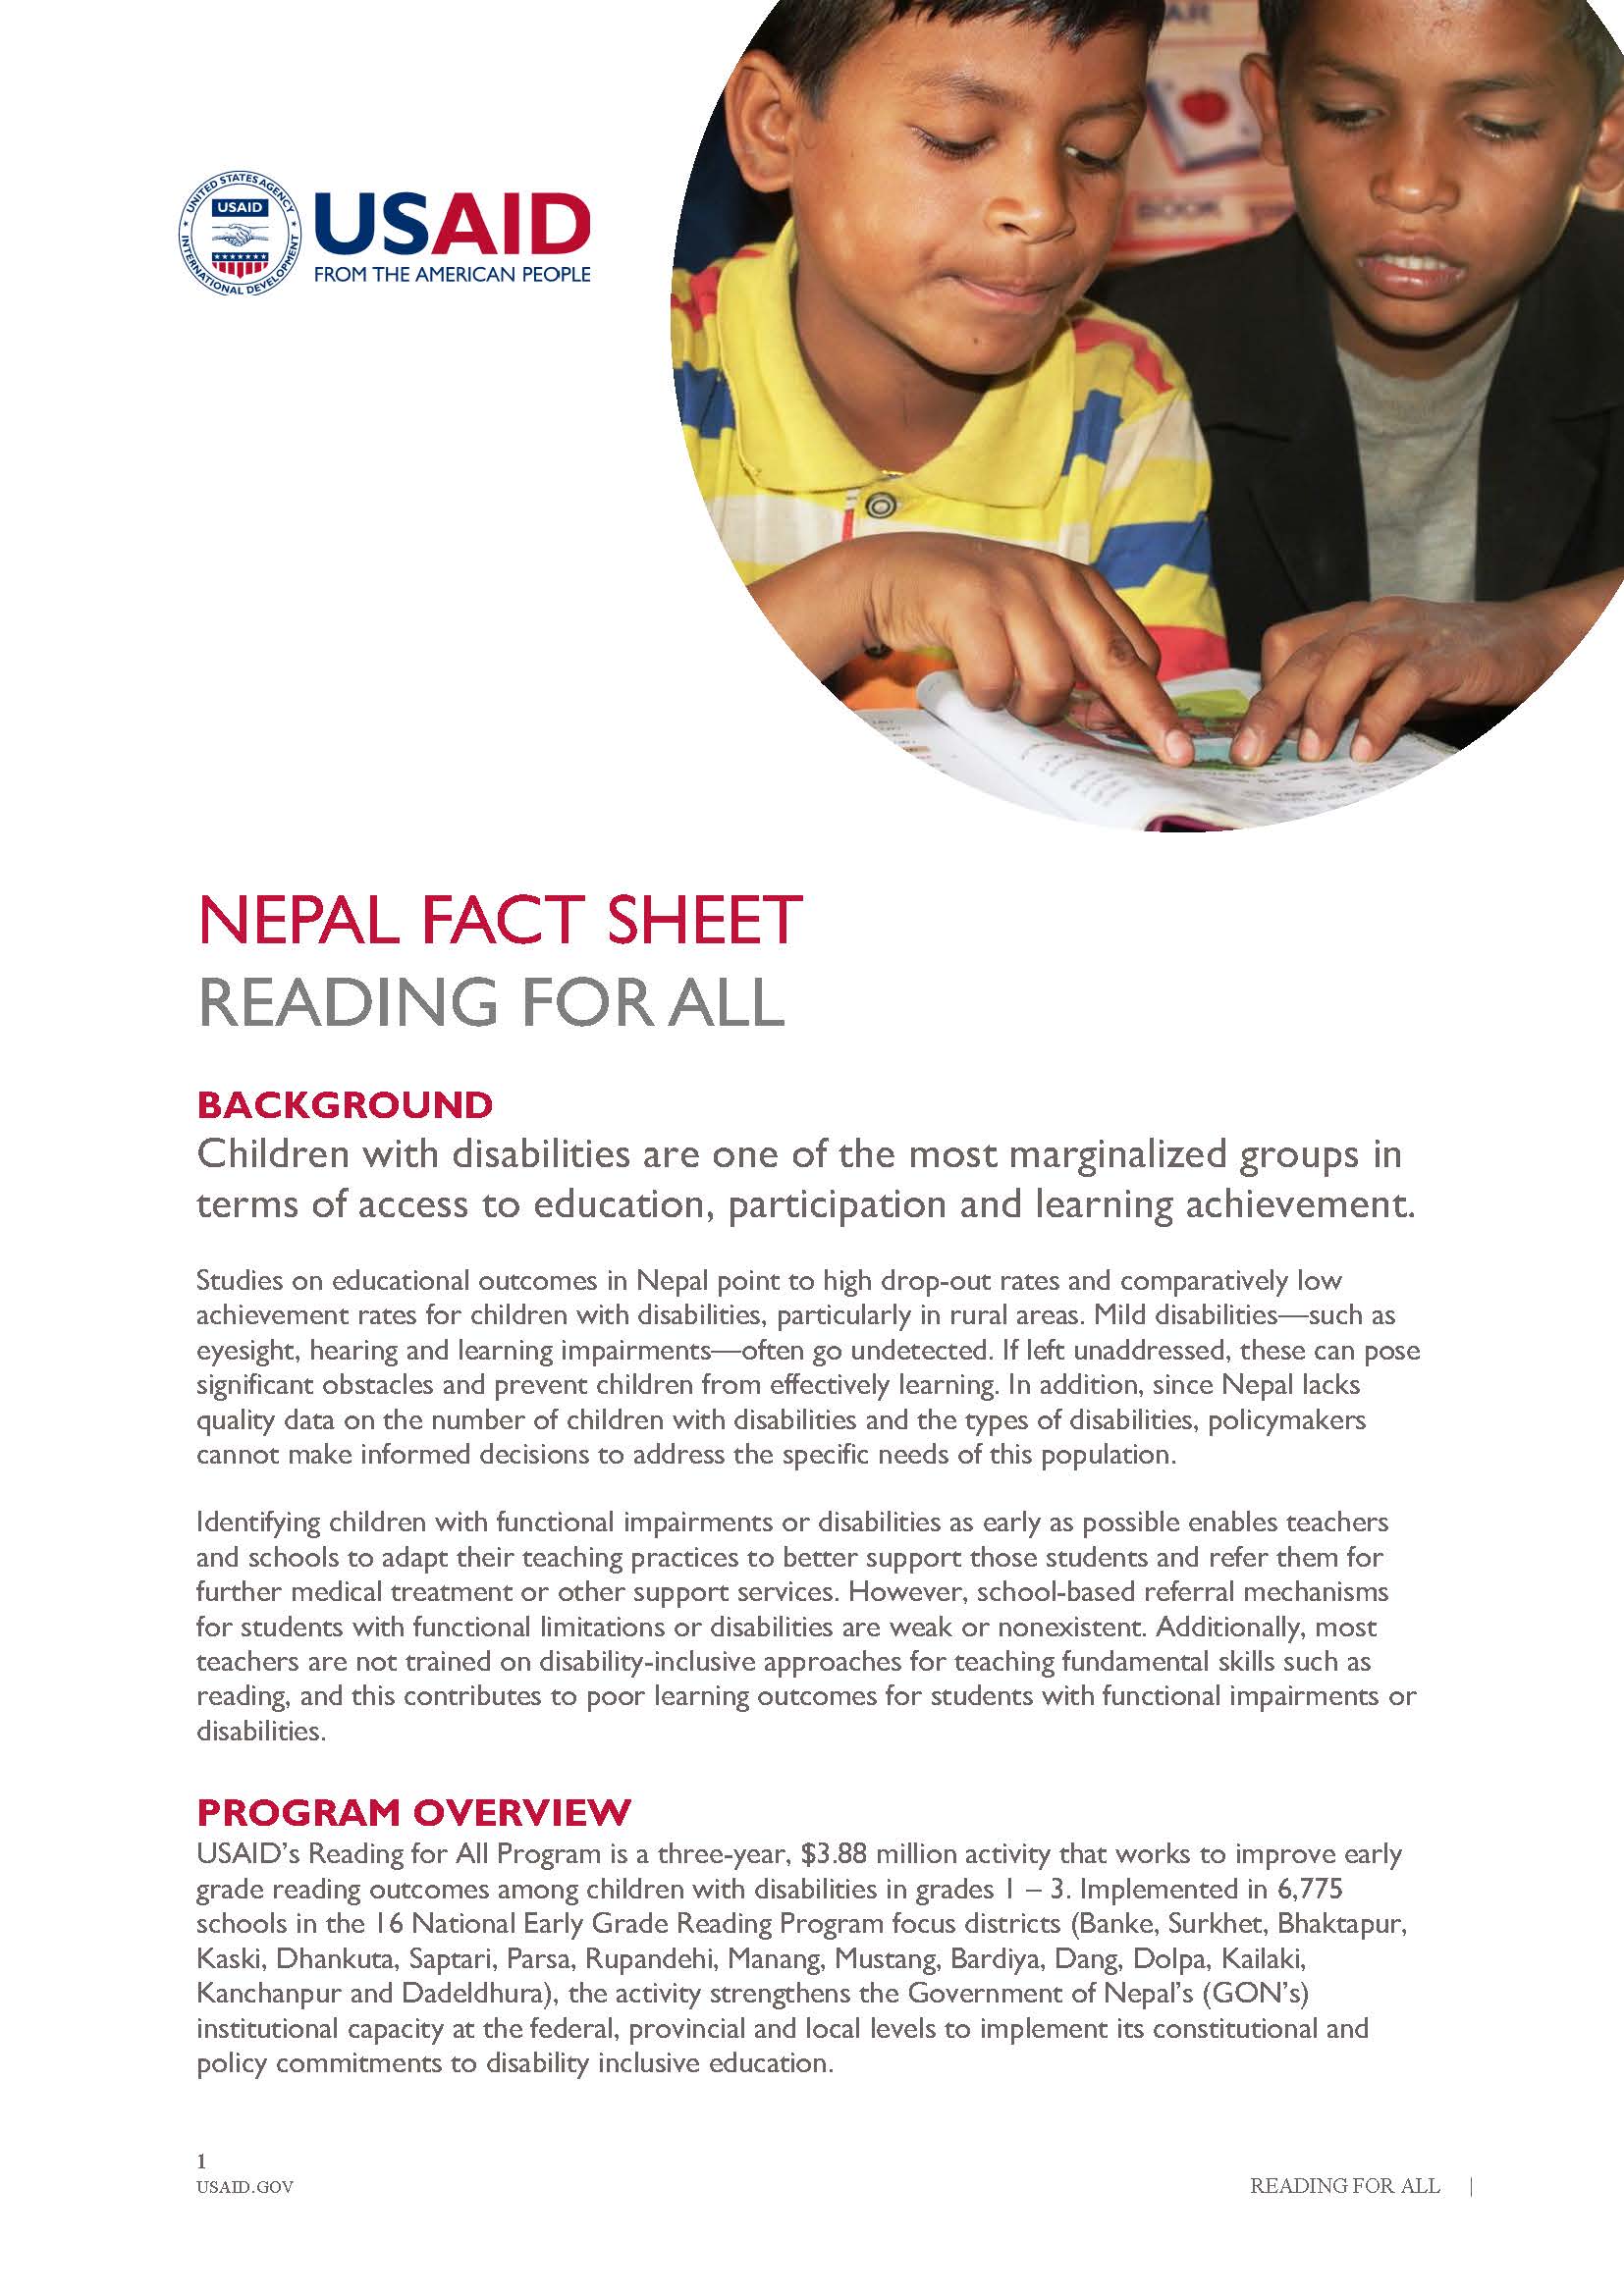 Factsheet: READING FOR ALL